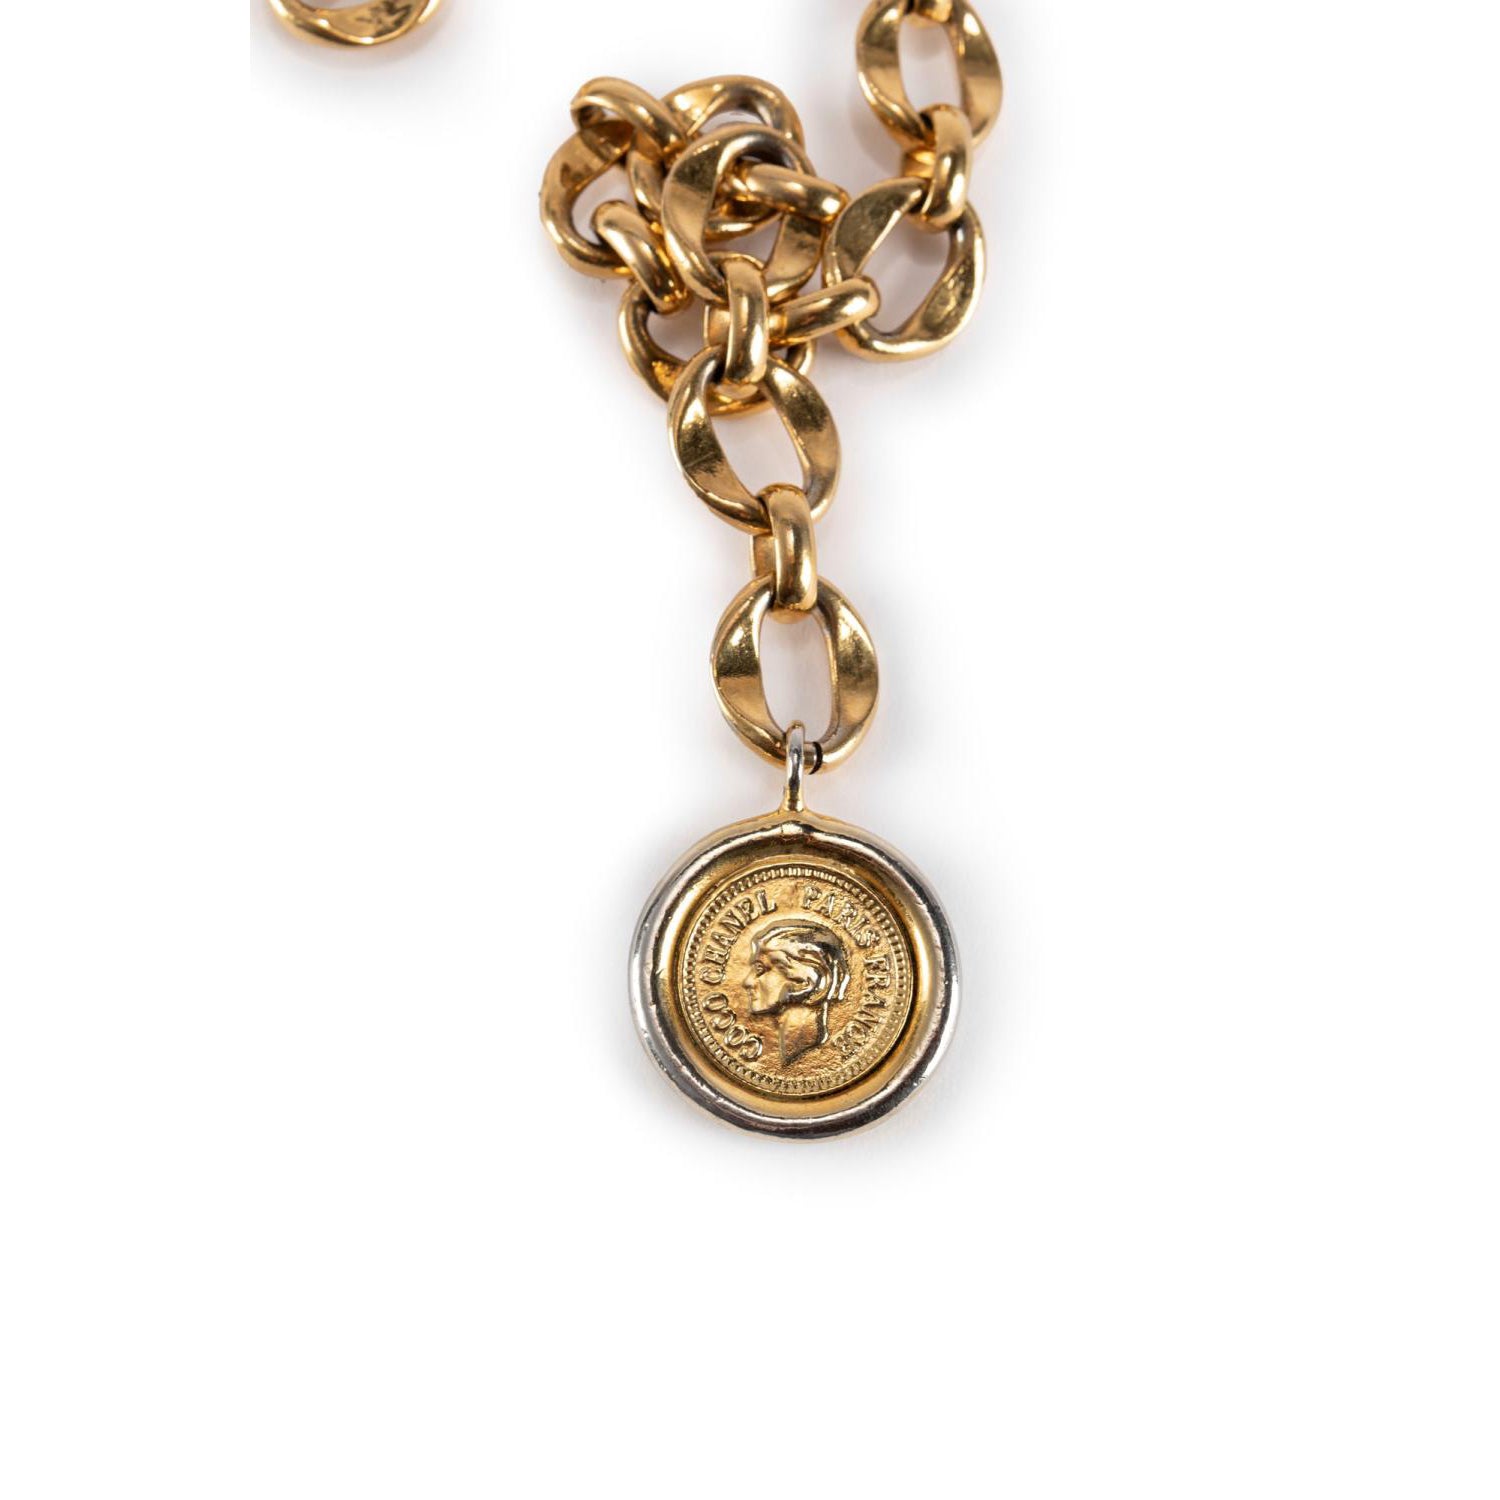 Chanel Gold Chain Belt with Coin Drop